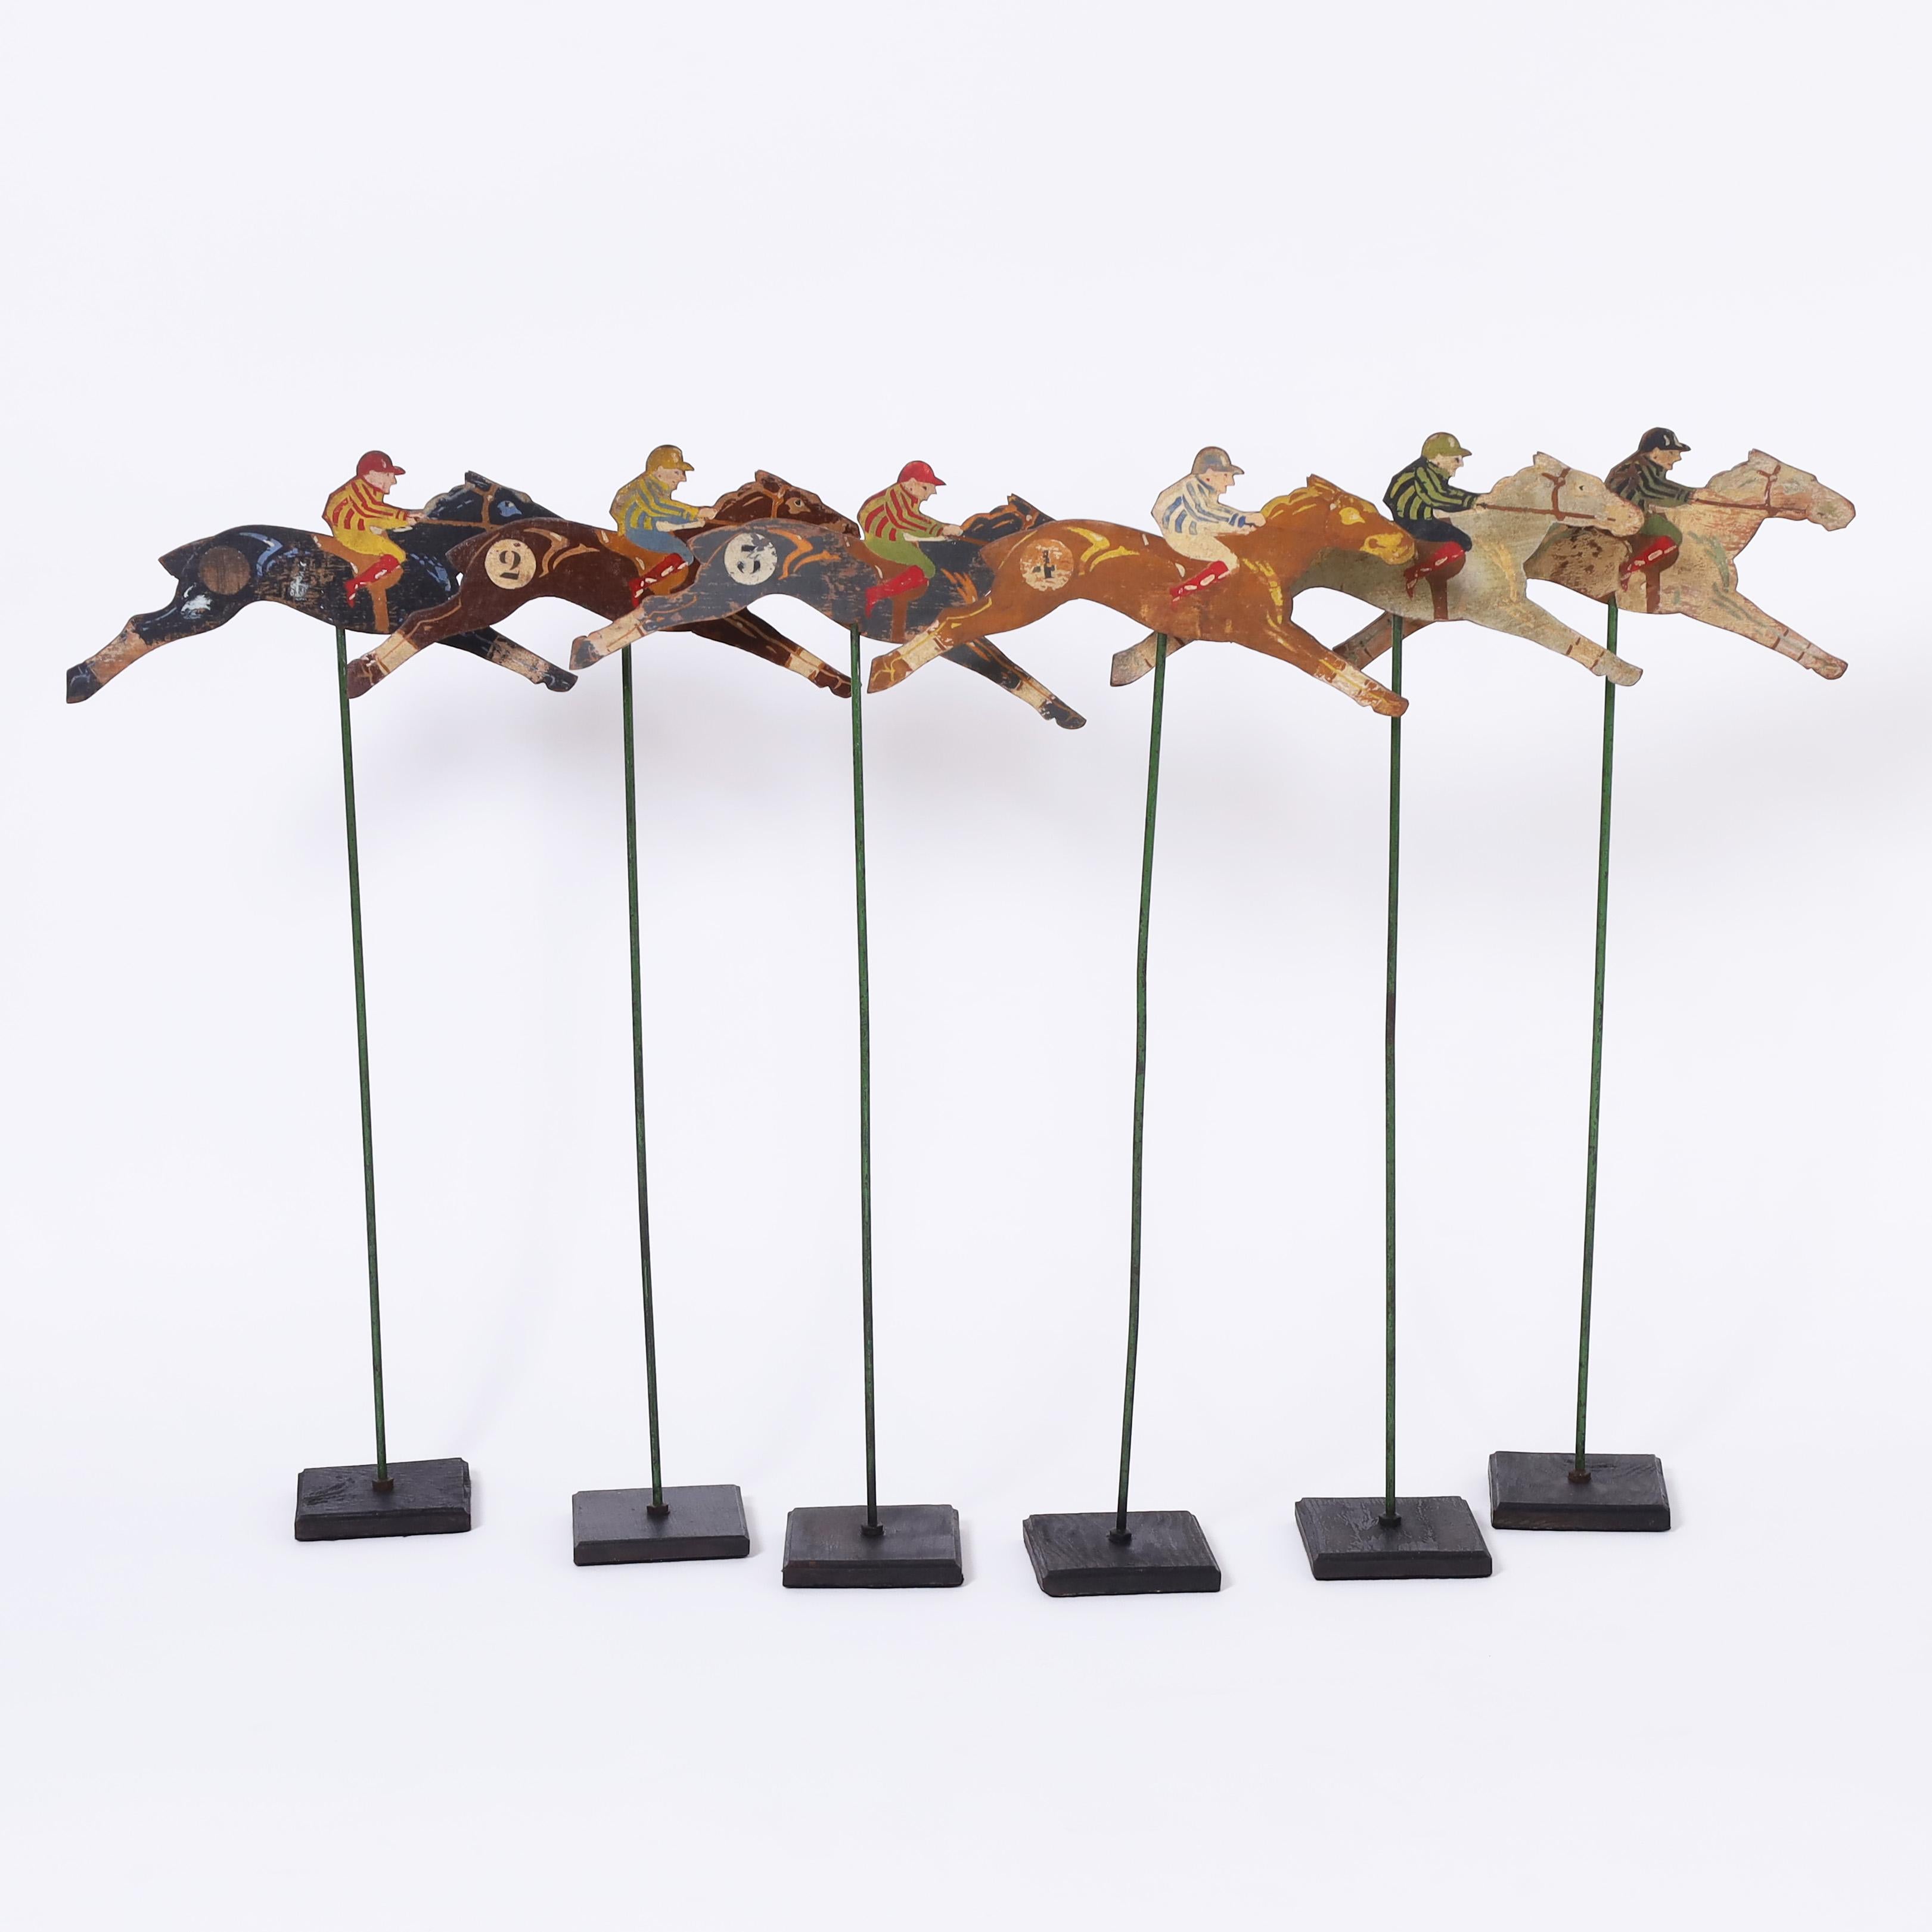 Charming set of six carnival game horse racing remnants crafted in wood, hand painted and numbered. Presented on wood bases. Place your bets.